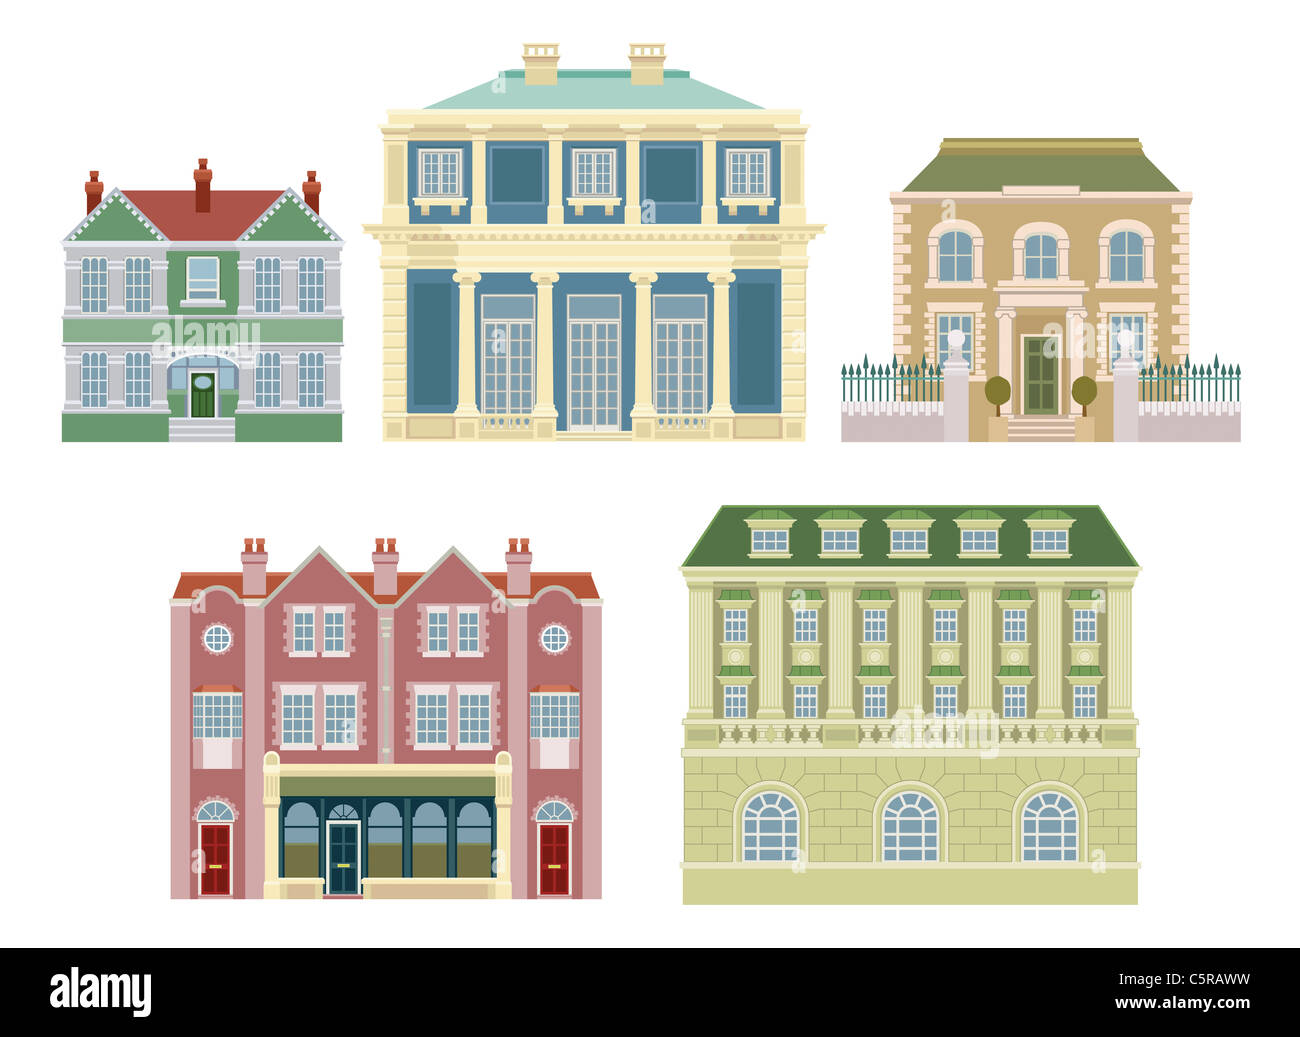 Smart expensive luxury old fashioned houses and other buildings. Stock Photo